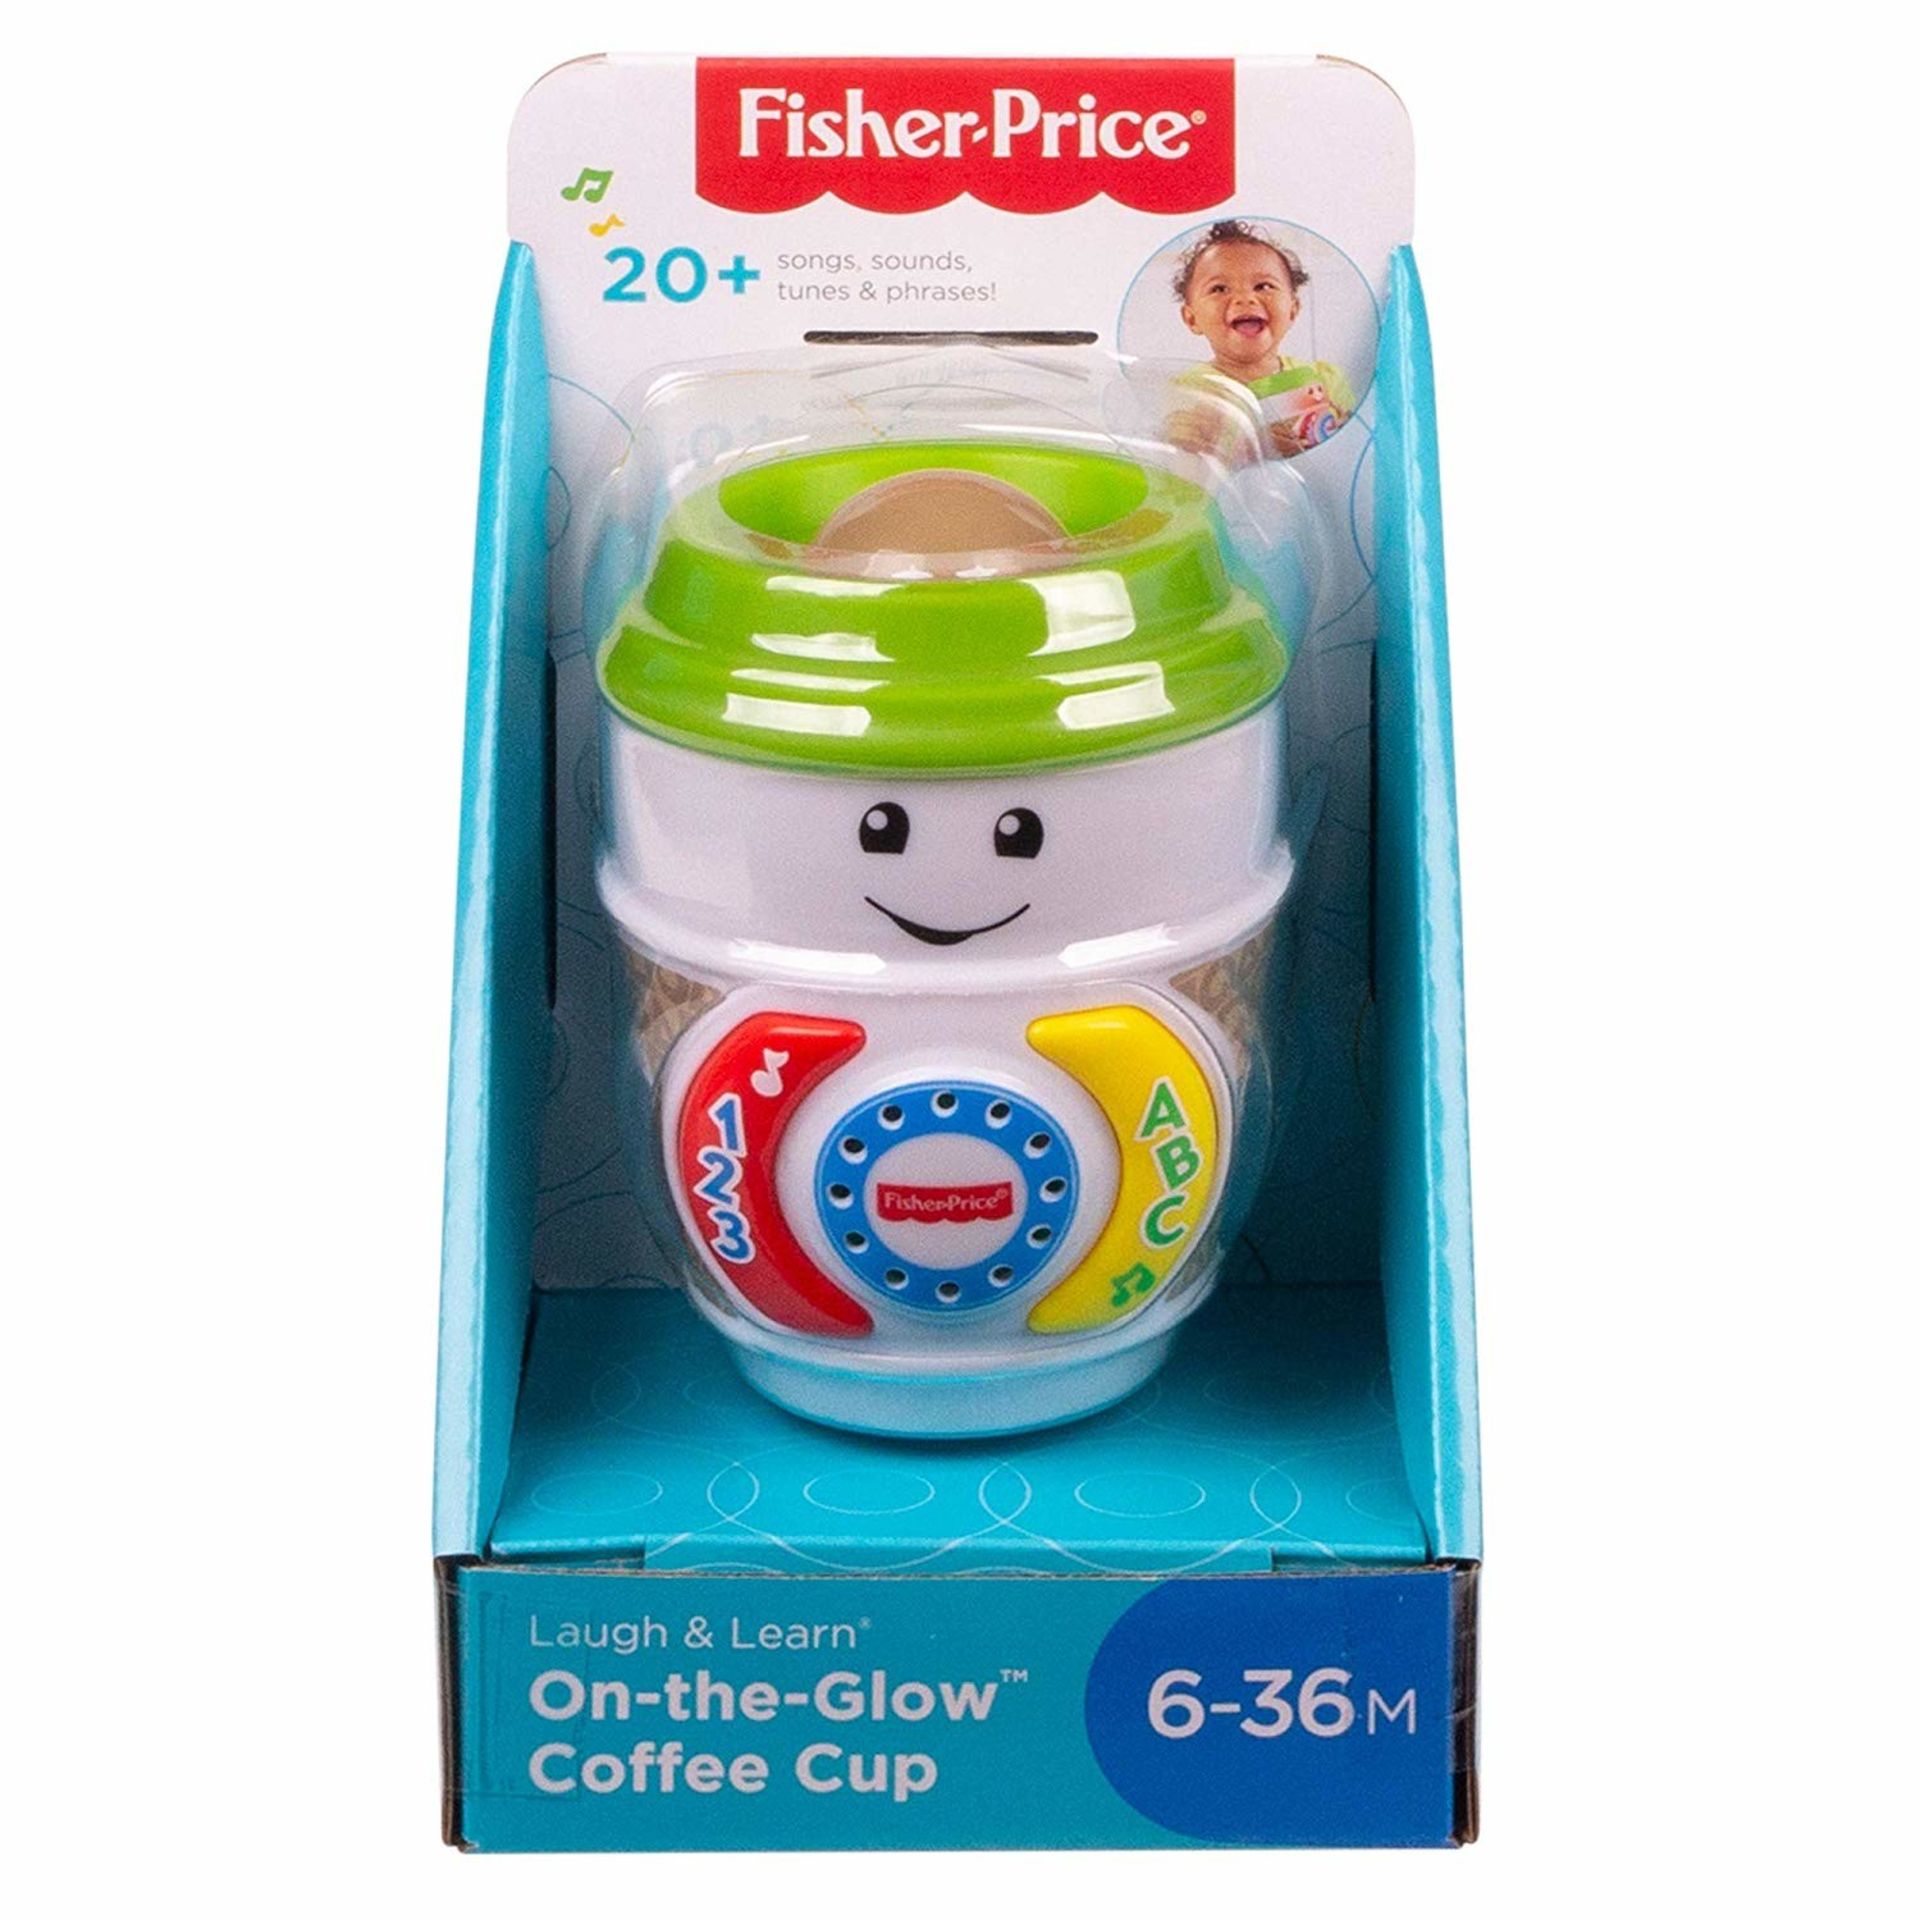 New Fisher Price Laugh & Learn On-the-Glow Coffee Cup - RRP £12.99.